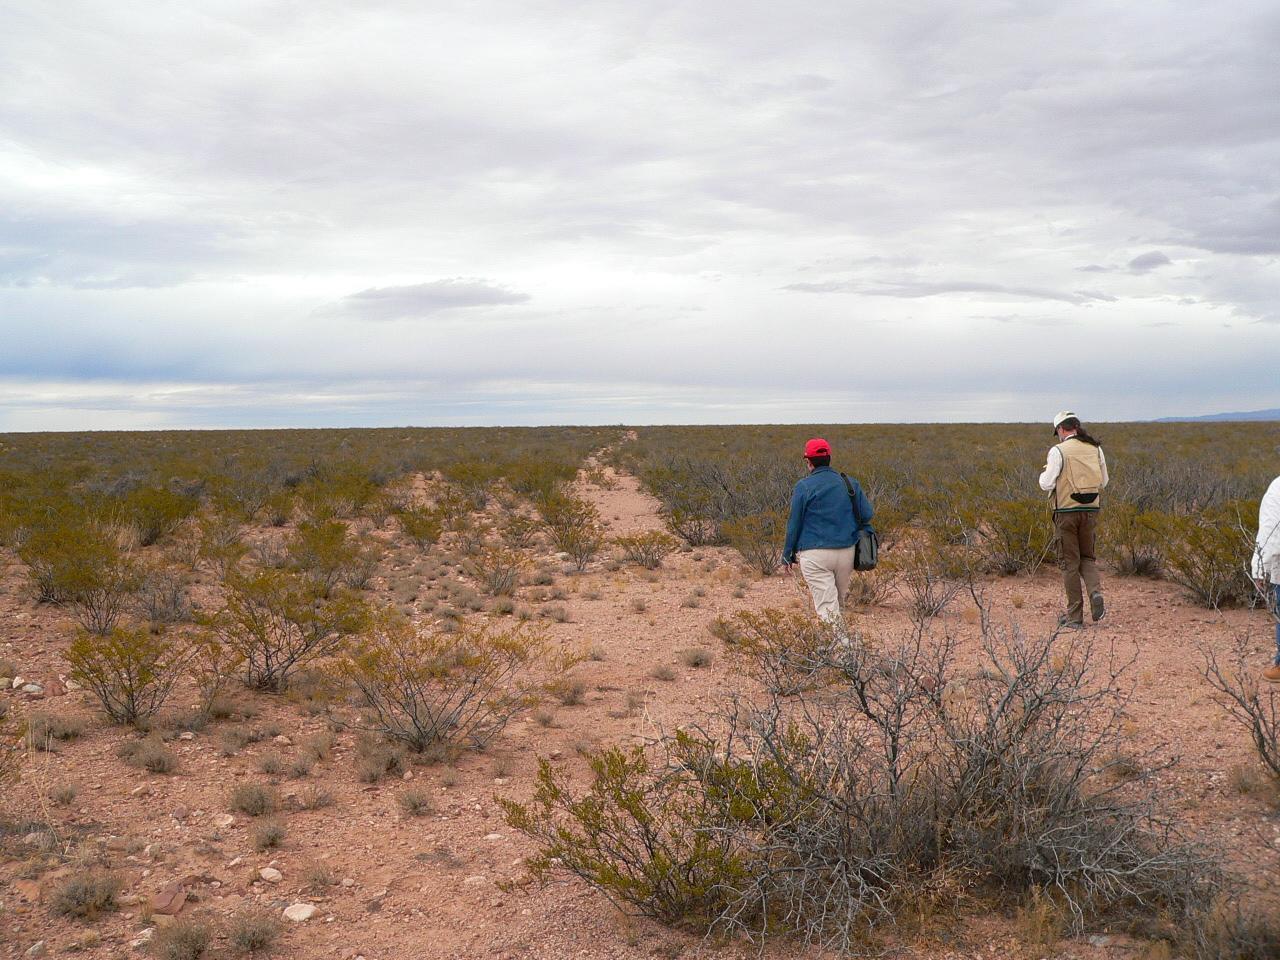 A couple walks North on the Yost Draw in Sierra County, NM